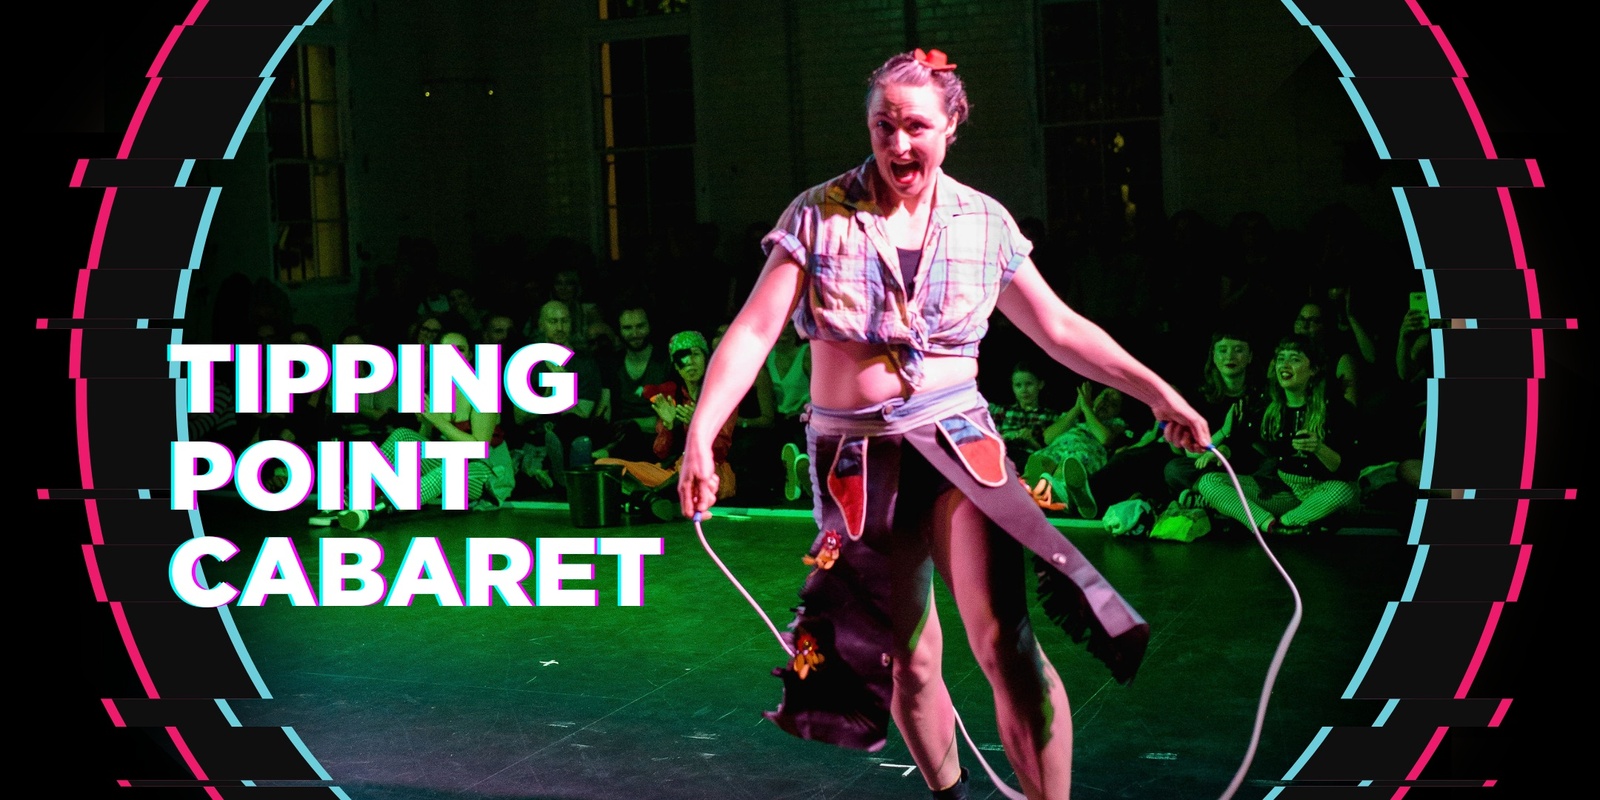 Banner image for Tipping Point Cabarets